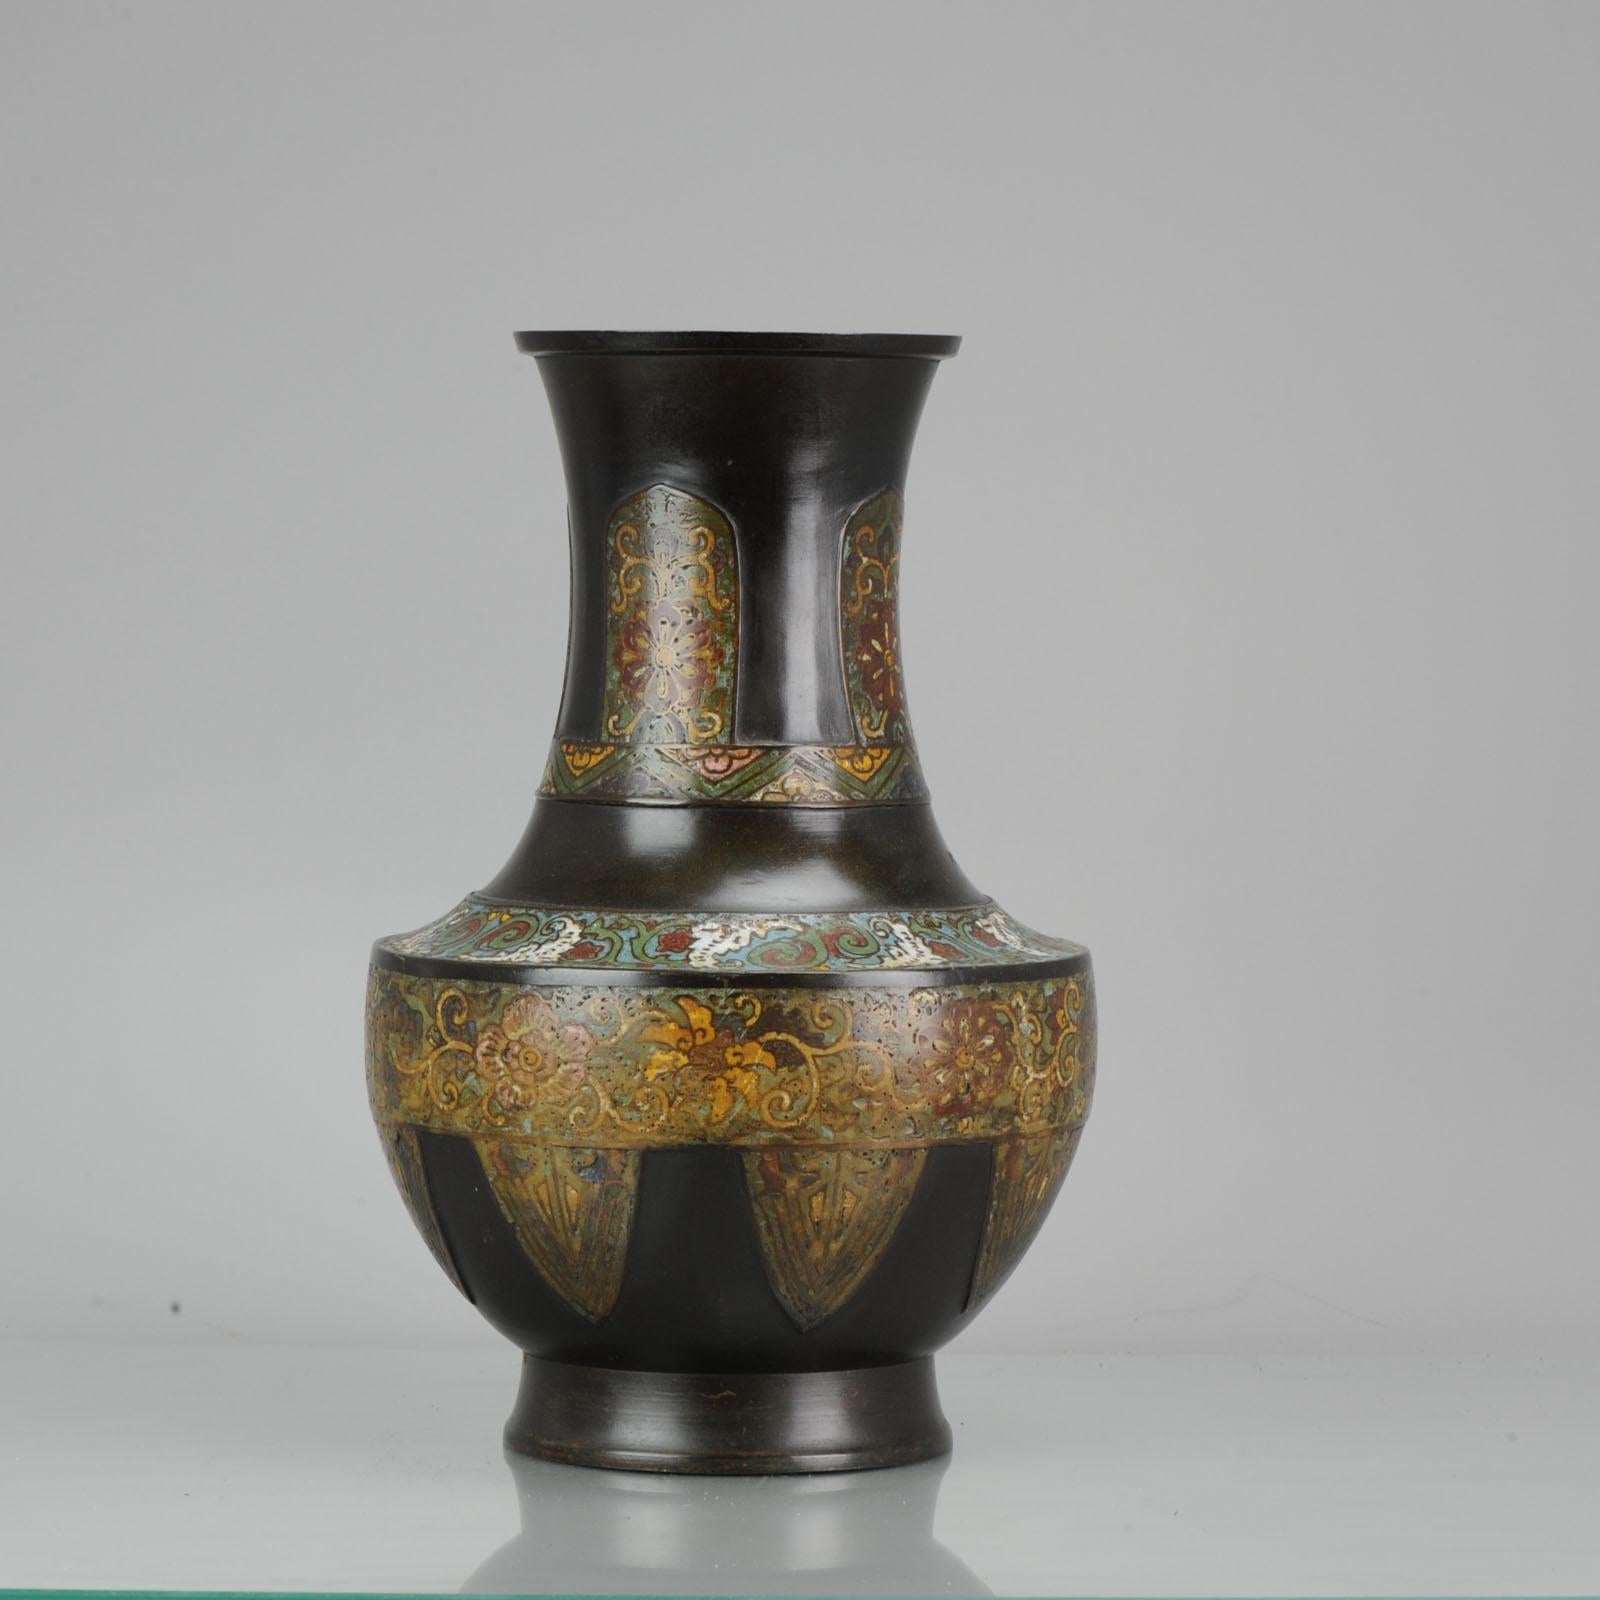 A very nice bronze vase with enamels.
 
Condition
Overall condition; close to Perfect, minimal age signs like small spots of missing enamel. Size: 340mm
Period
19th century
Meiji Period.

 